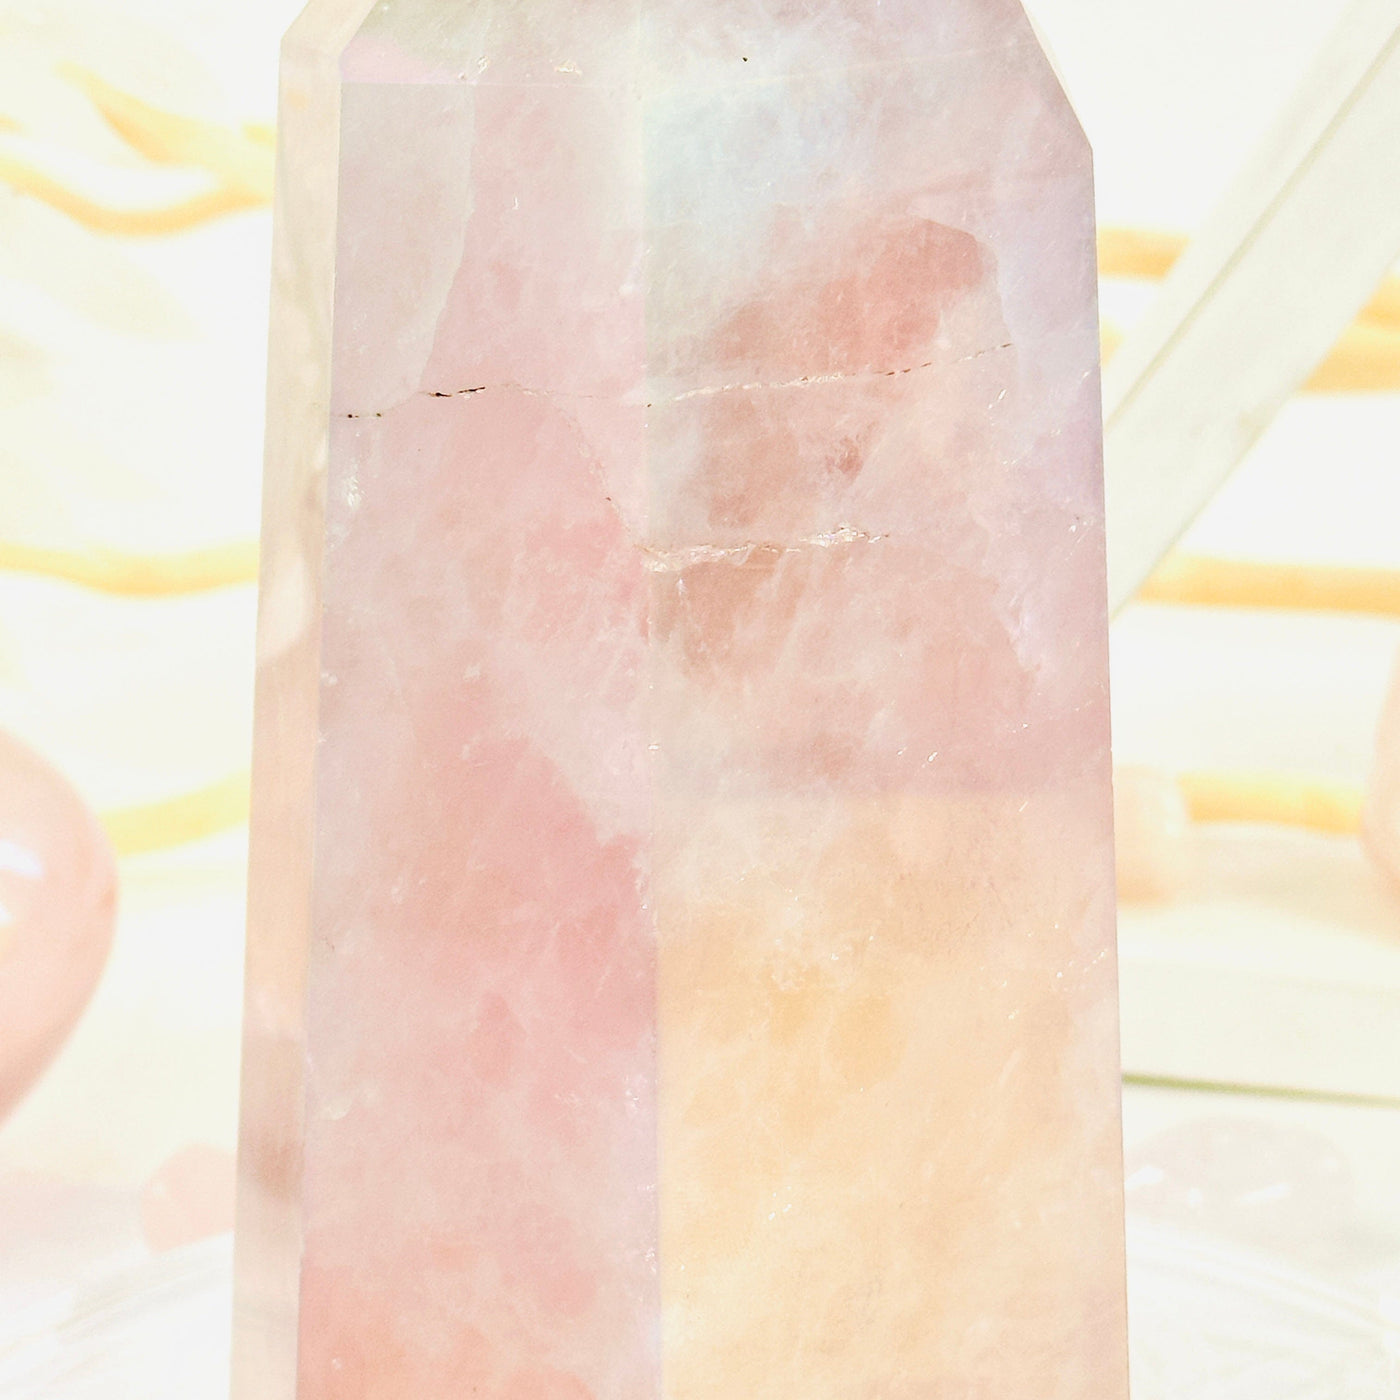 Angel Aura Rose Quartz Polished Point with Natural Inclusions closeup to show natural inclusions detail